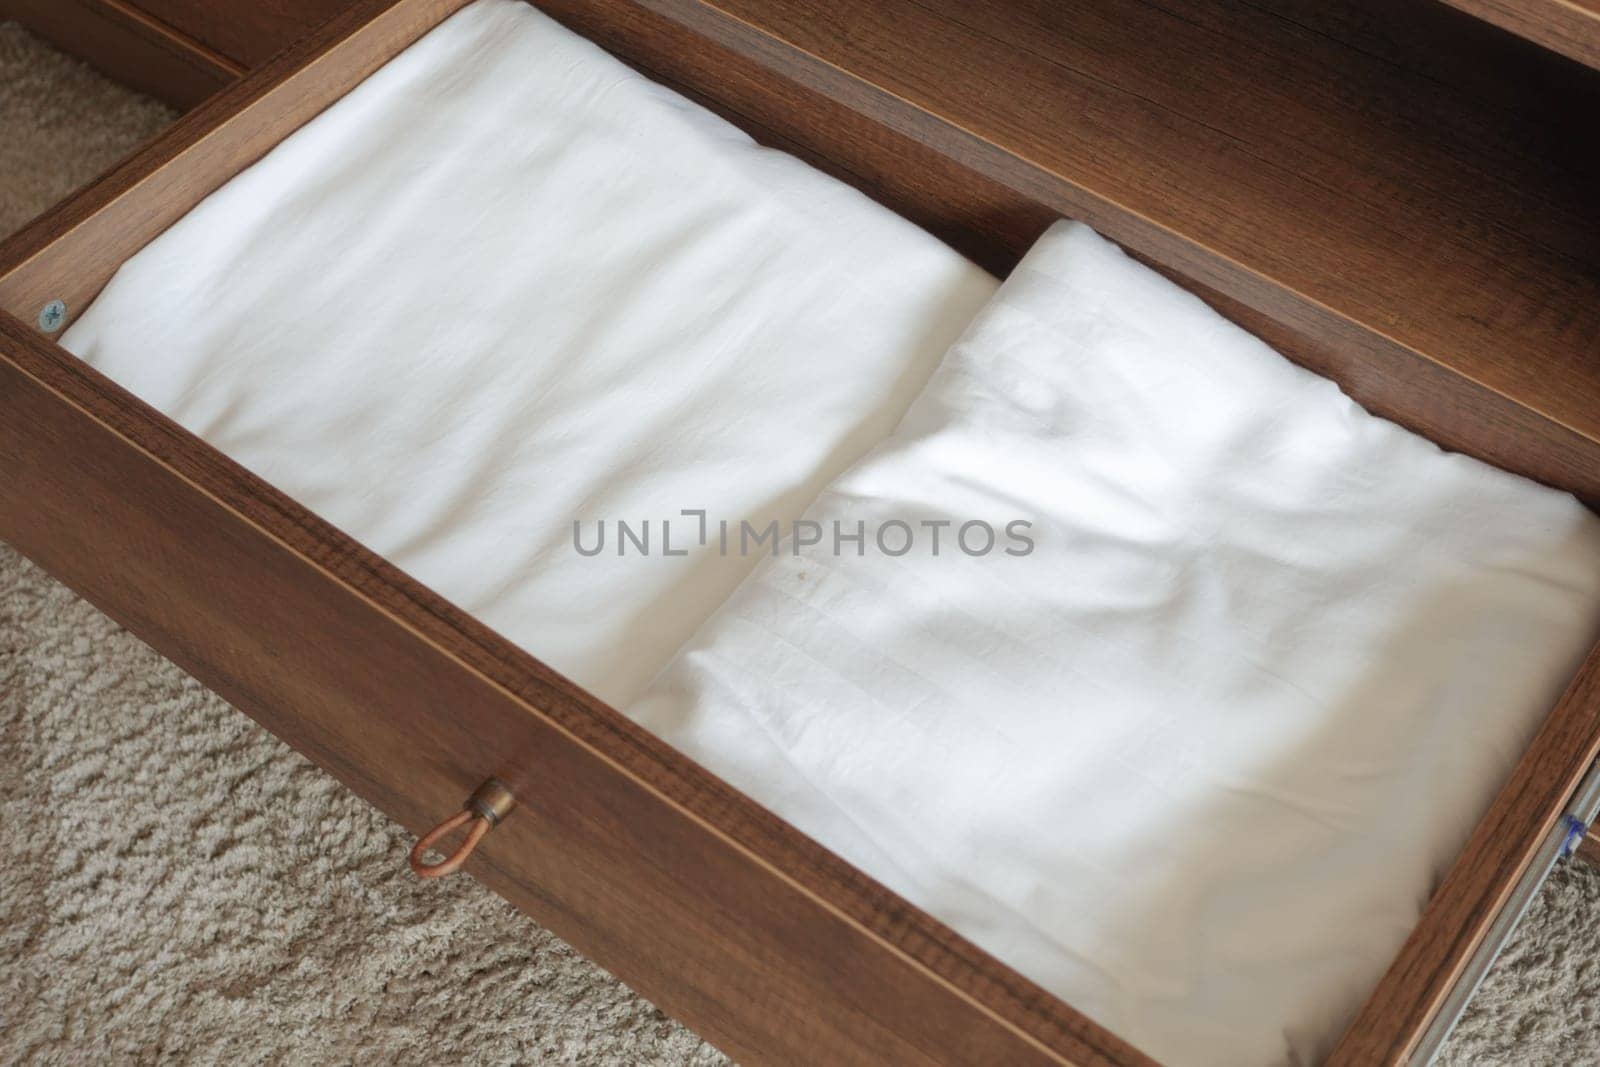 Hardwood drawer with two white linens in a varnished wood stain by towfiq007